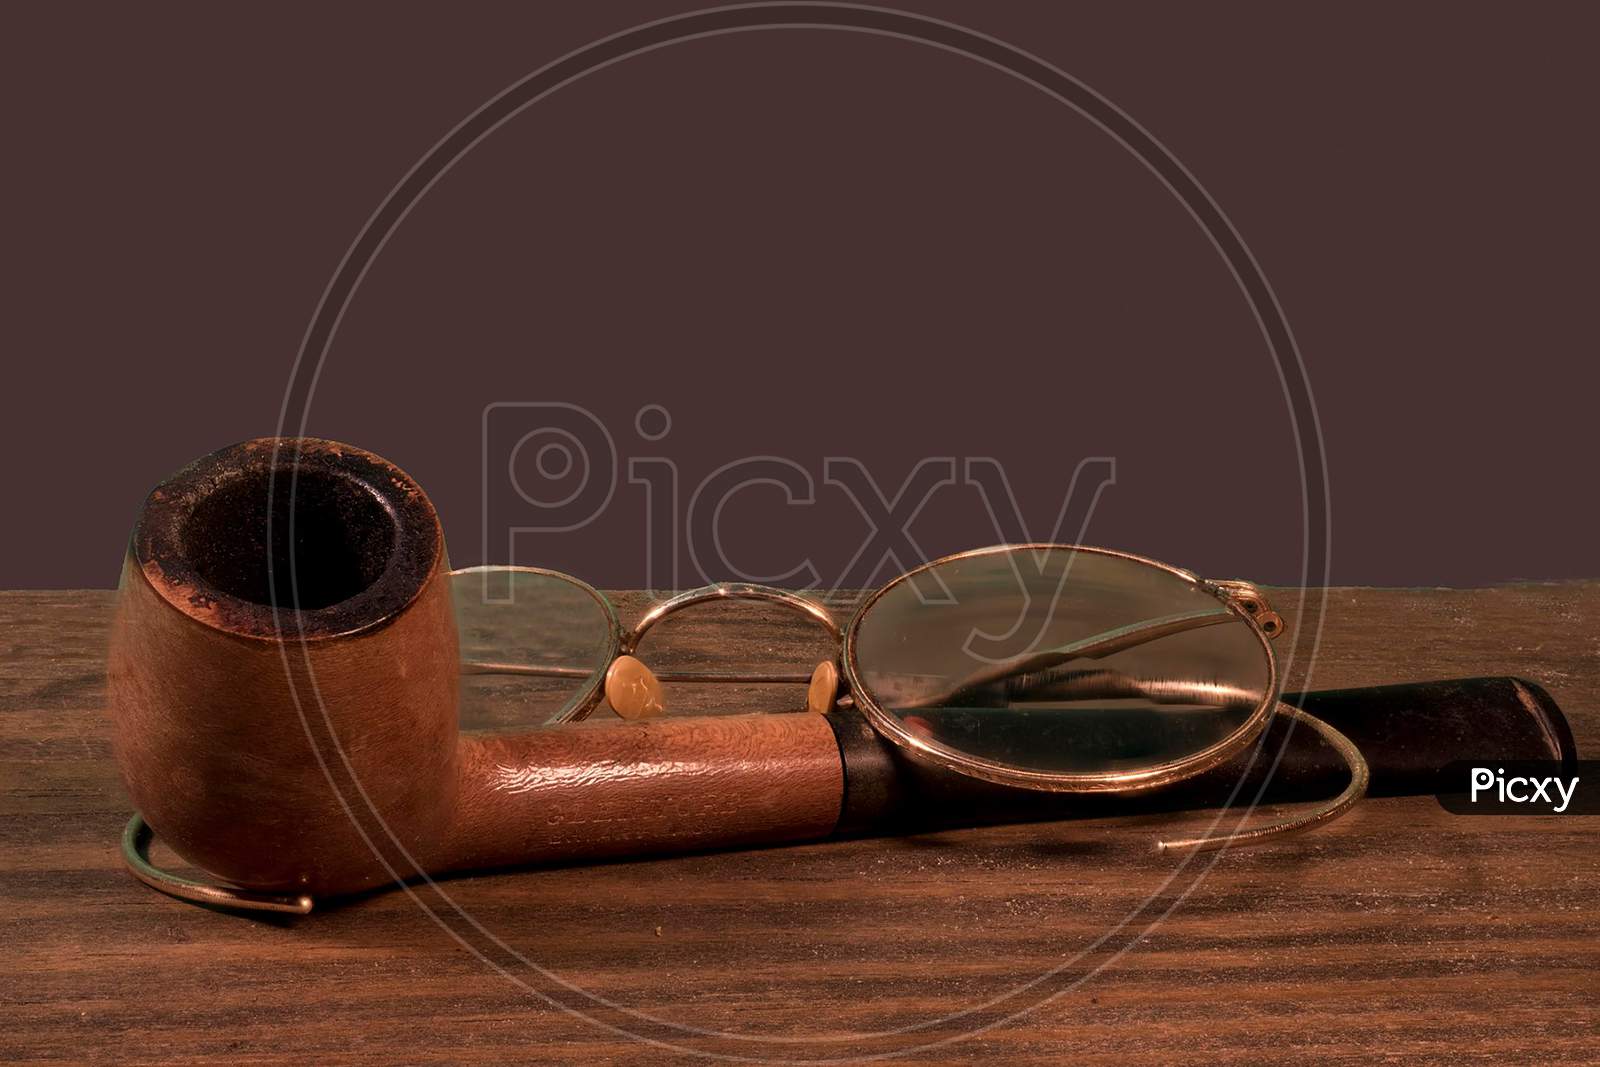 The Old Pipe Cigar With Spectacles